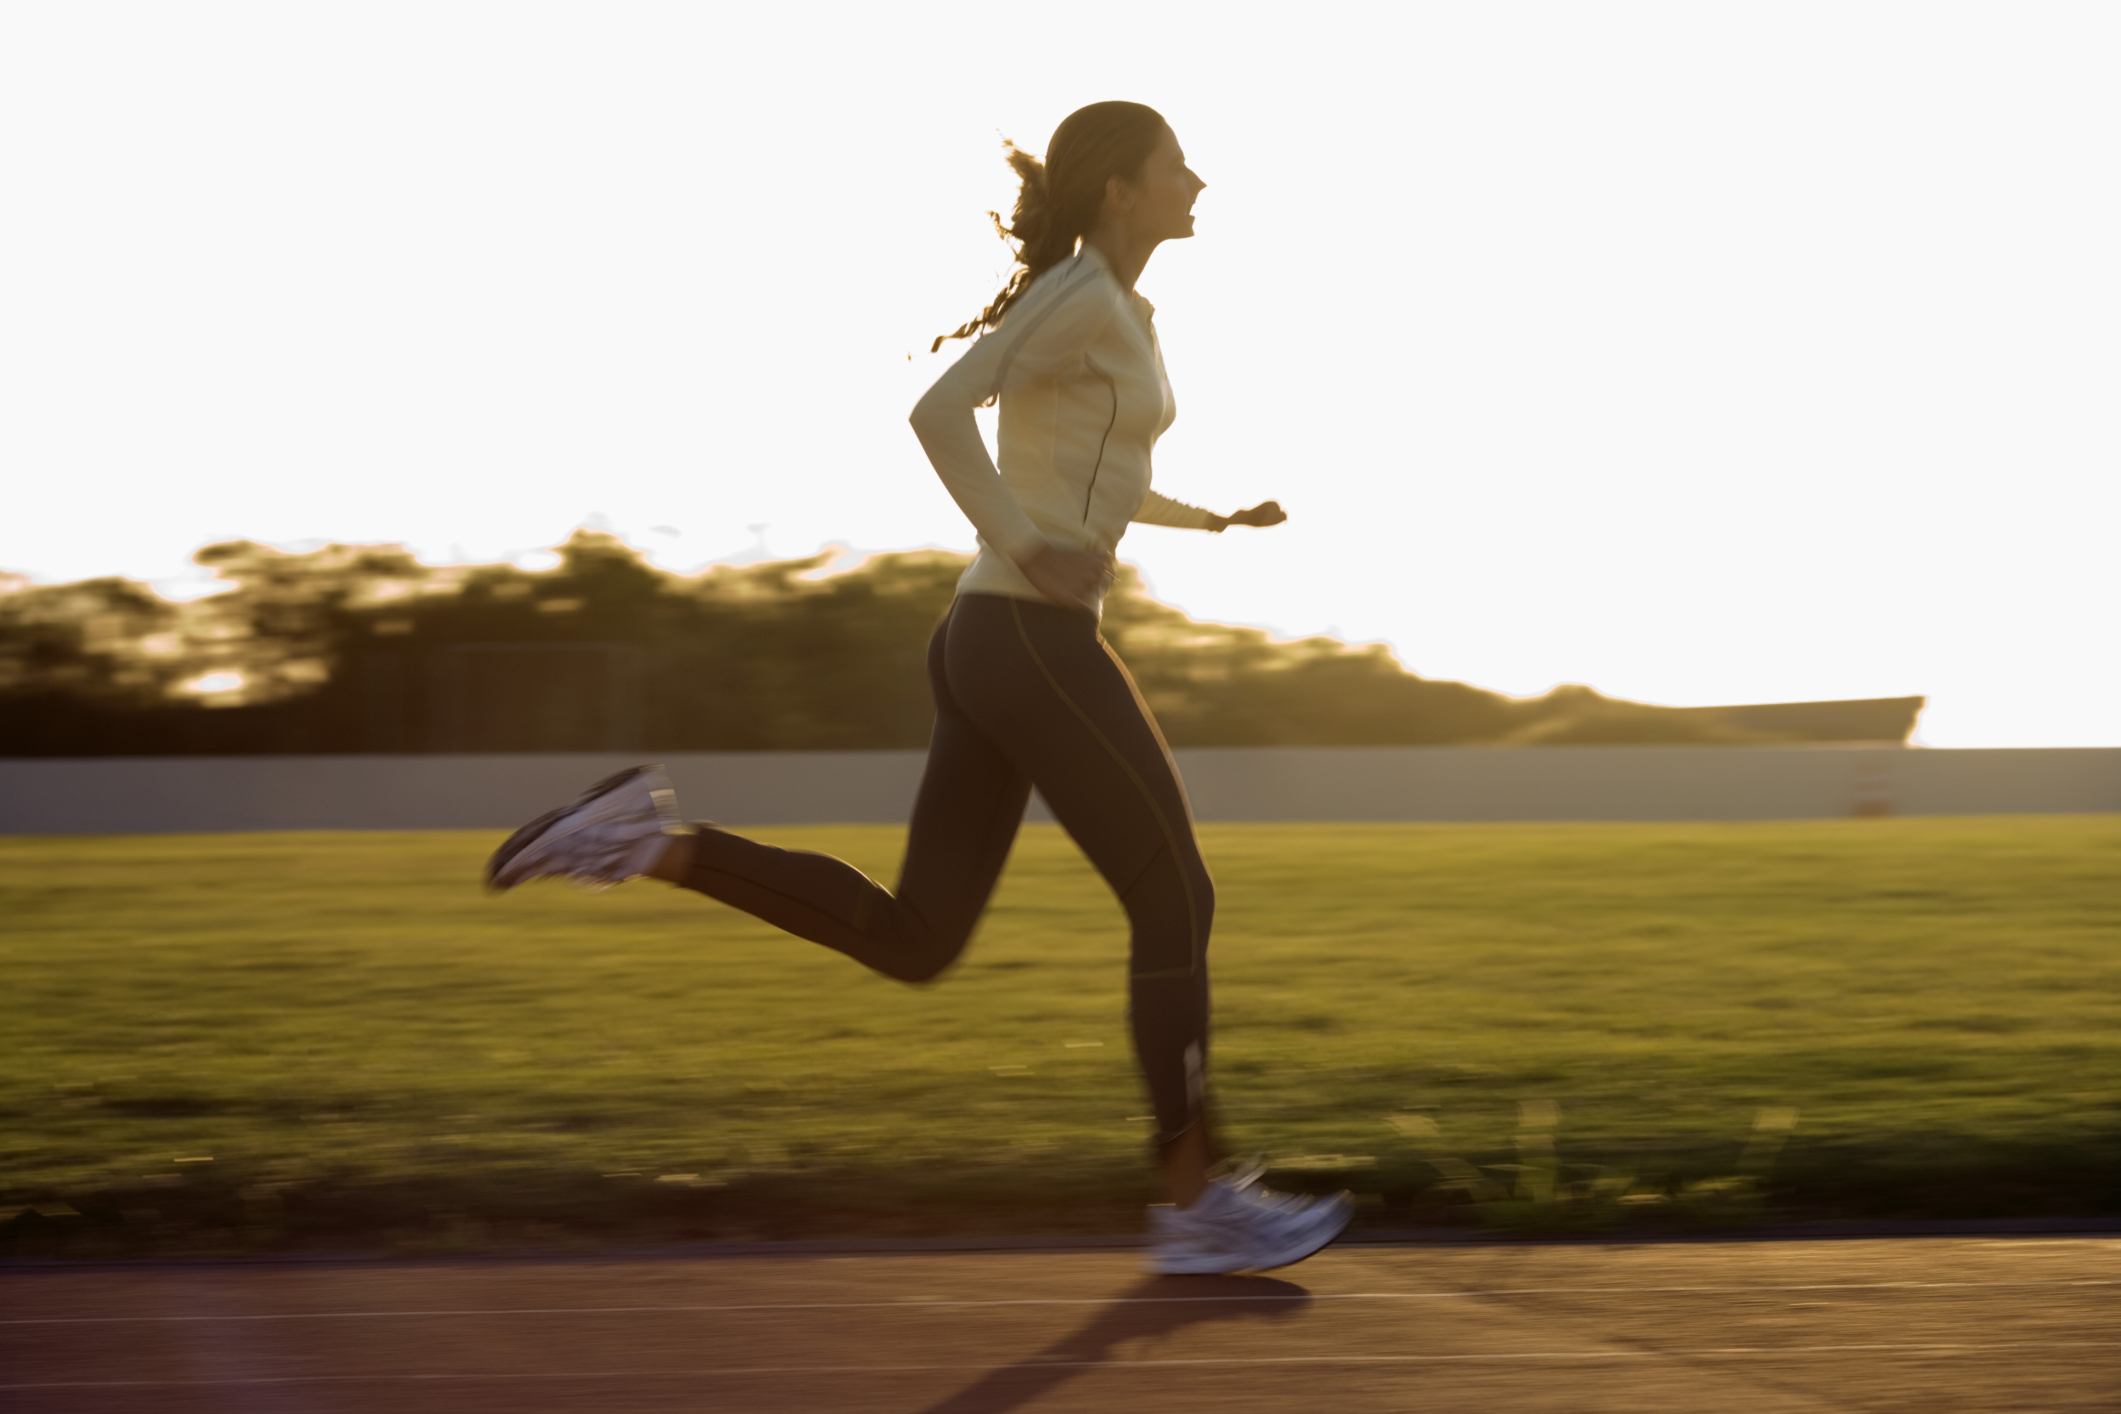 How Long Should My Run Be to Lose Weight?